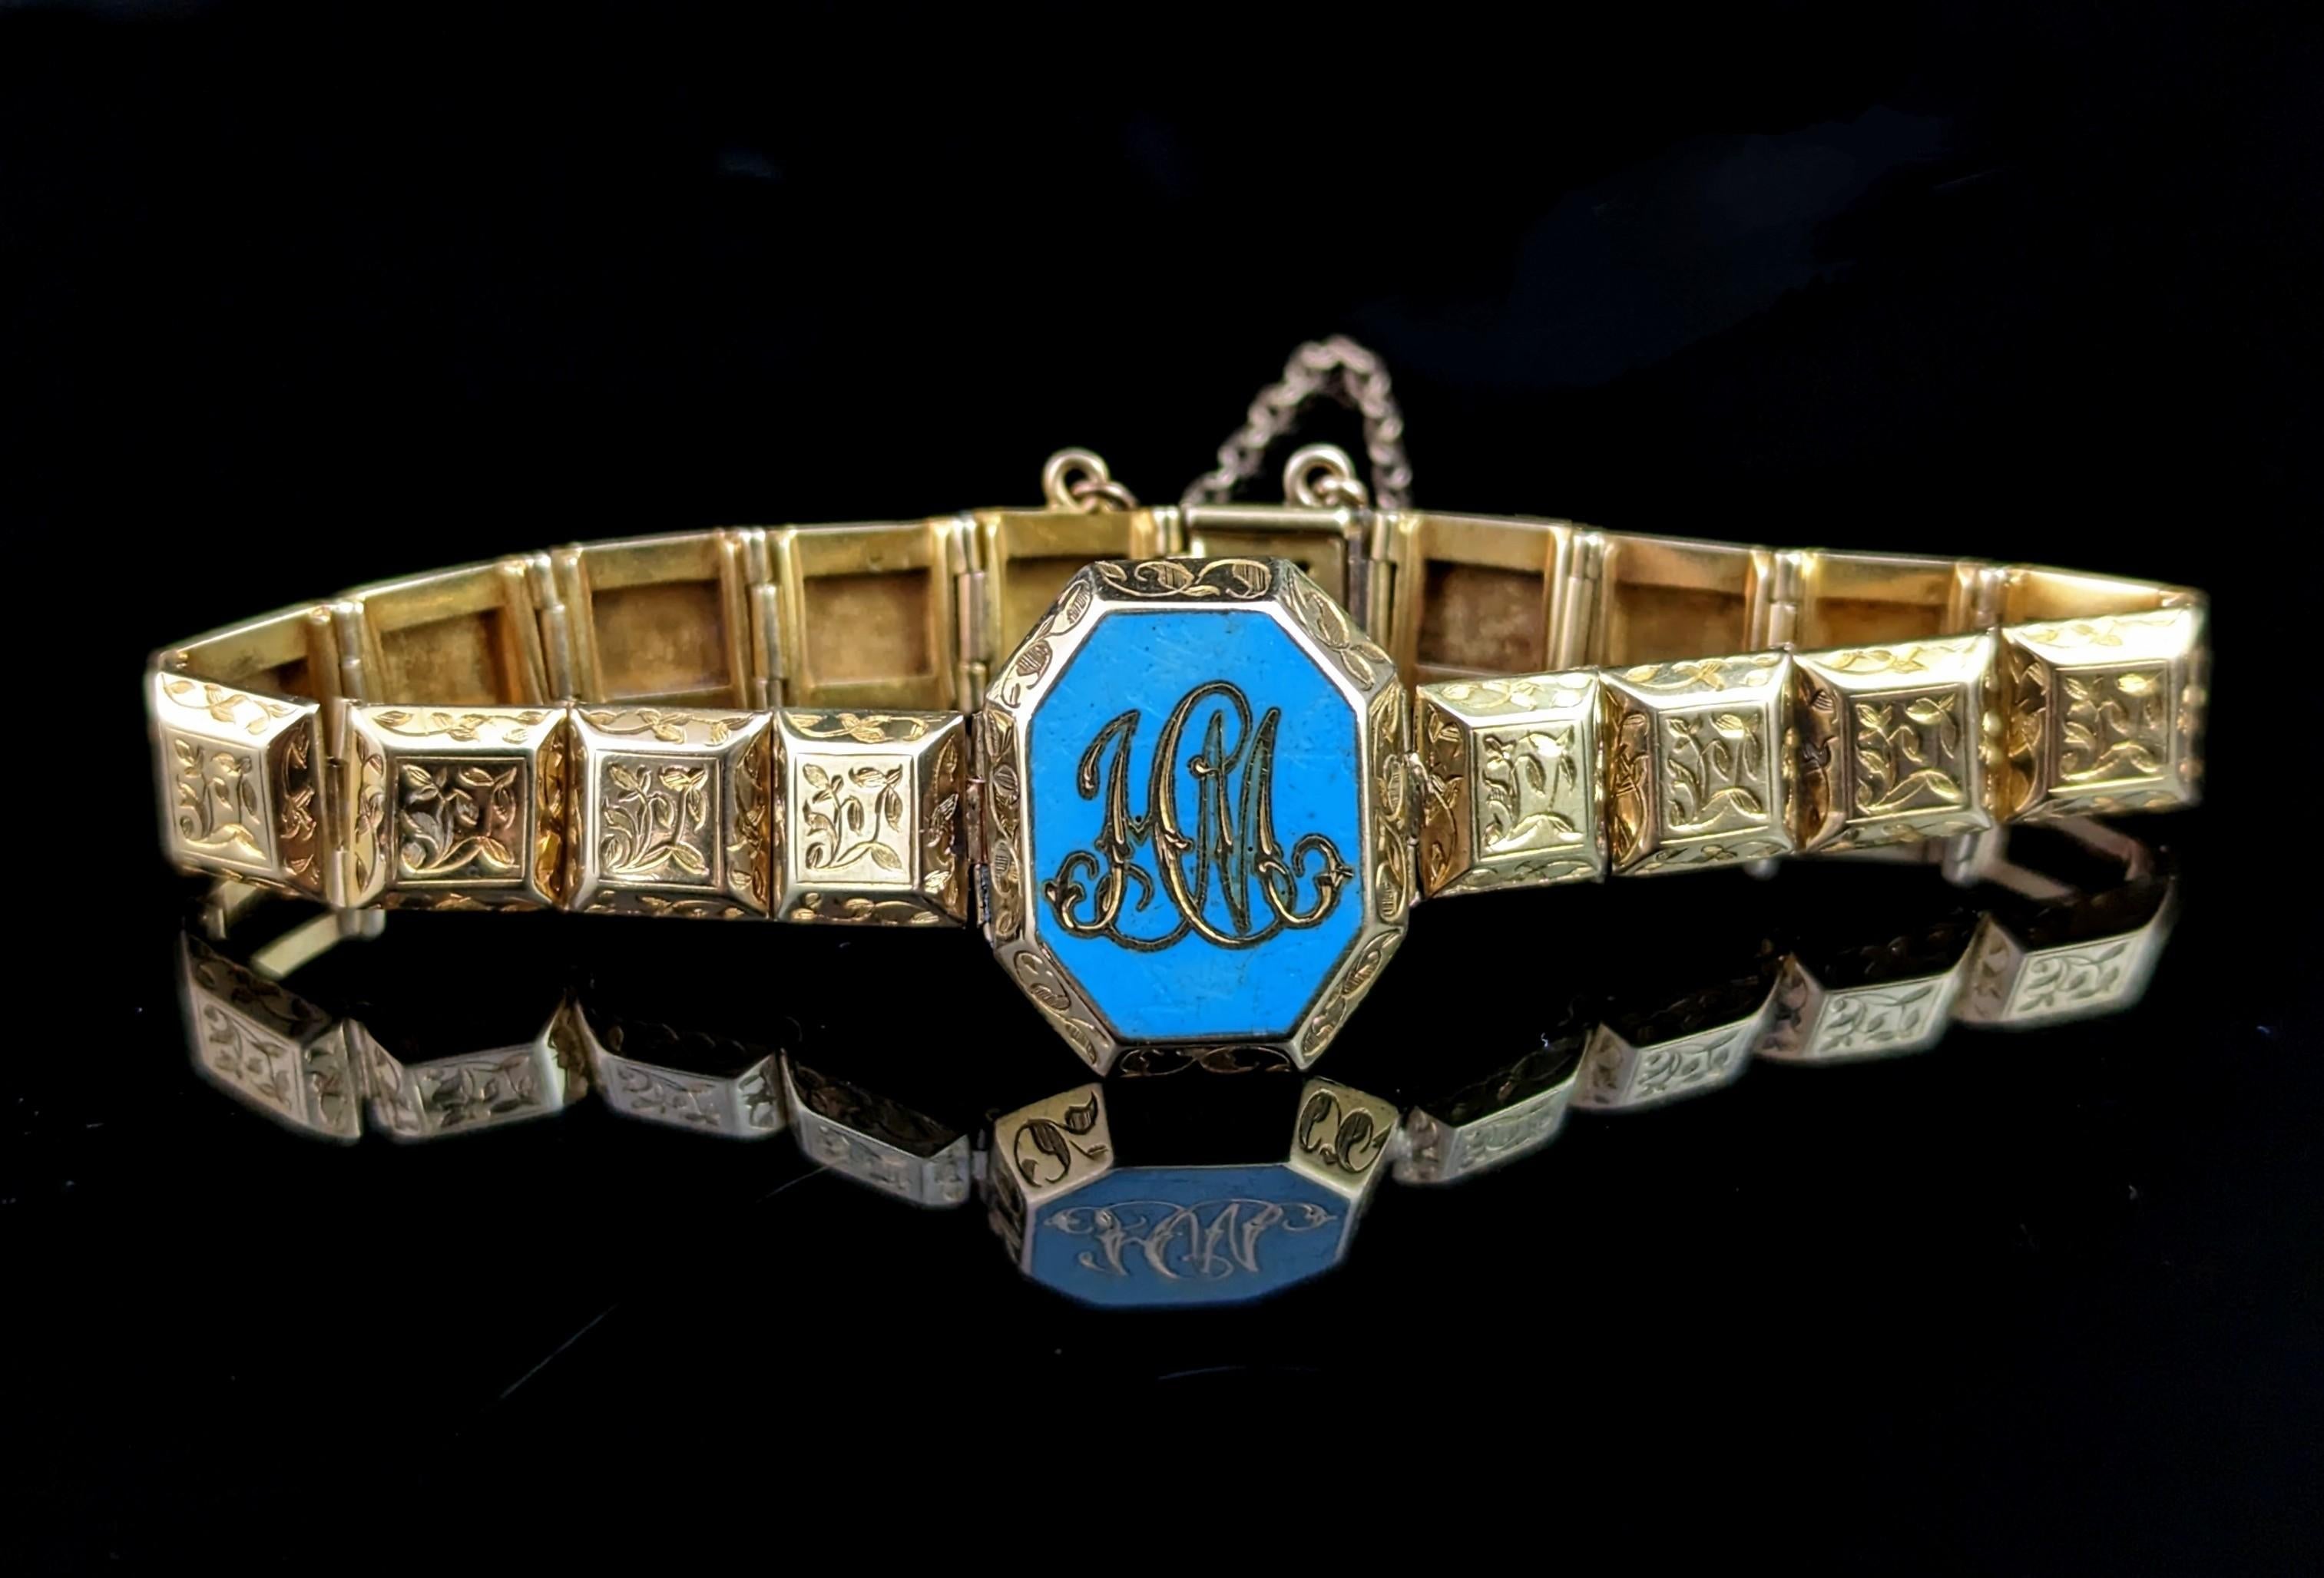 This stunning antique 18kt gold Mourning bracelet is both delicate and bold at the same time, capturing the sublime craftsmanship of Victorian Mourning jewellery without being immediately obviously a Mourning piece.

This rare and unusual bracelet